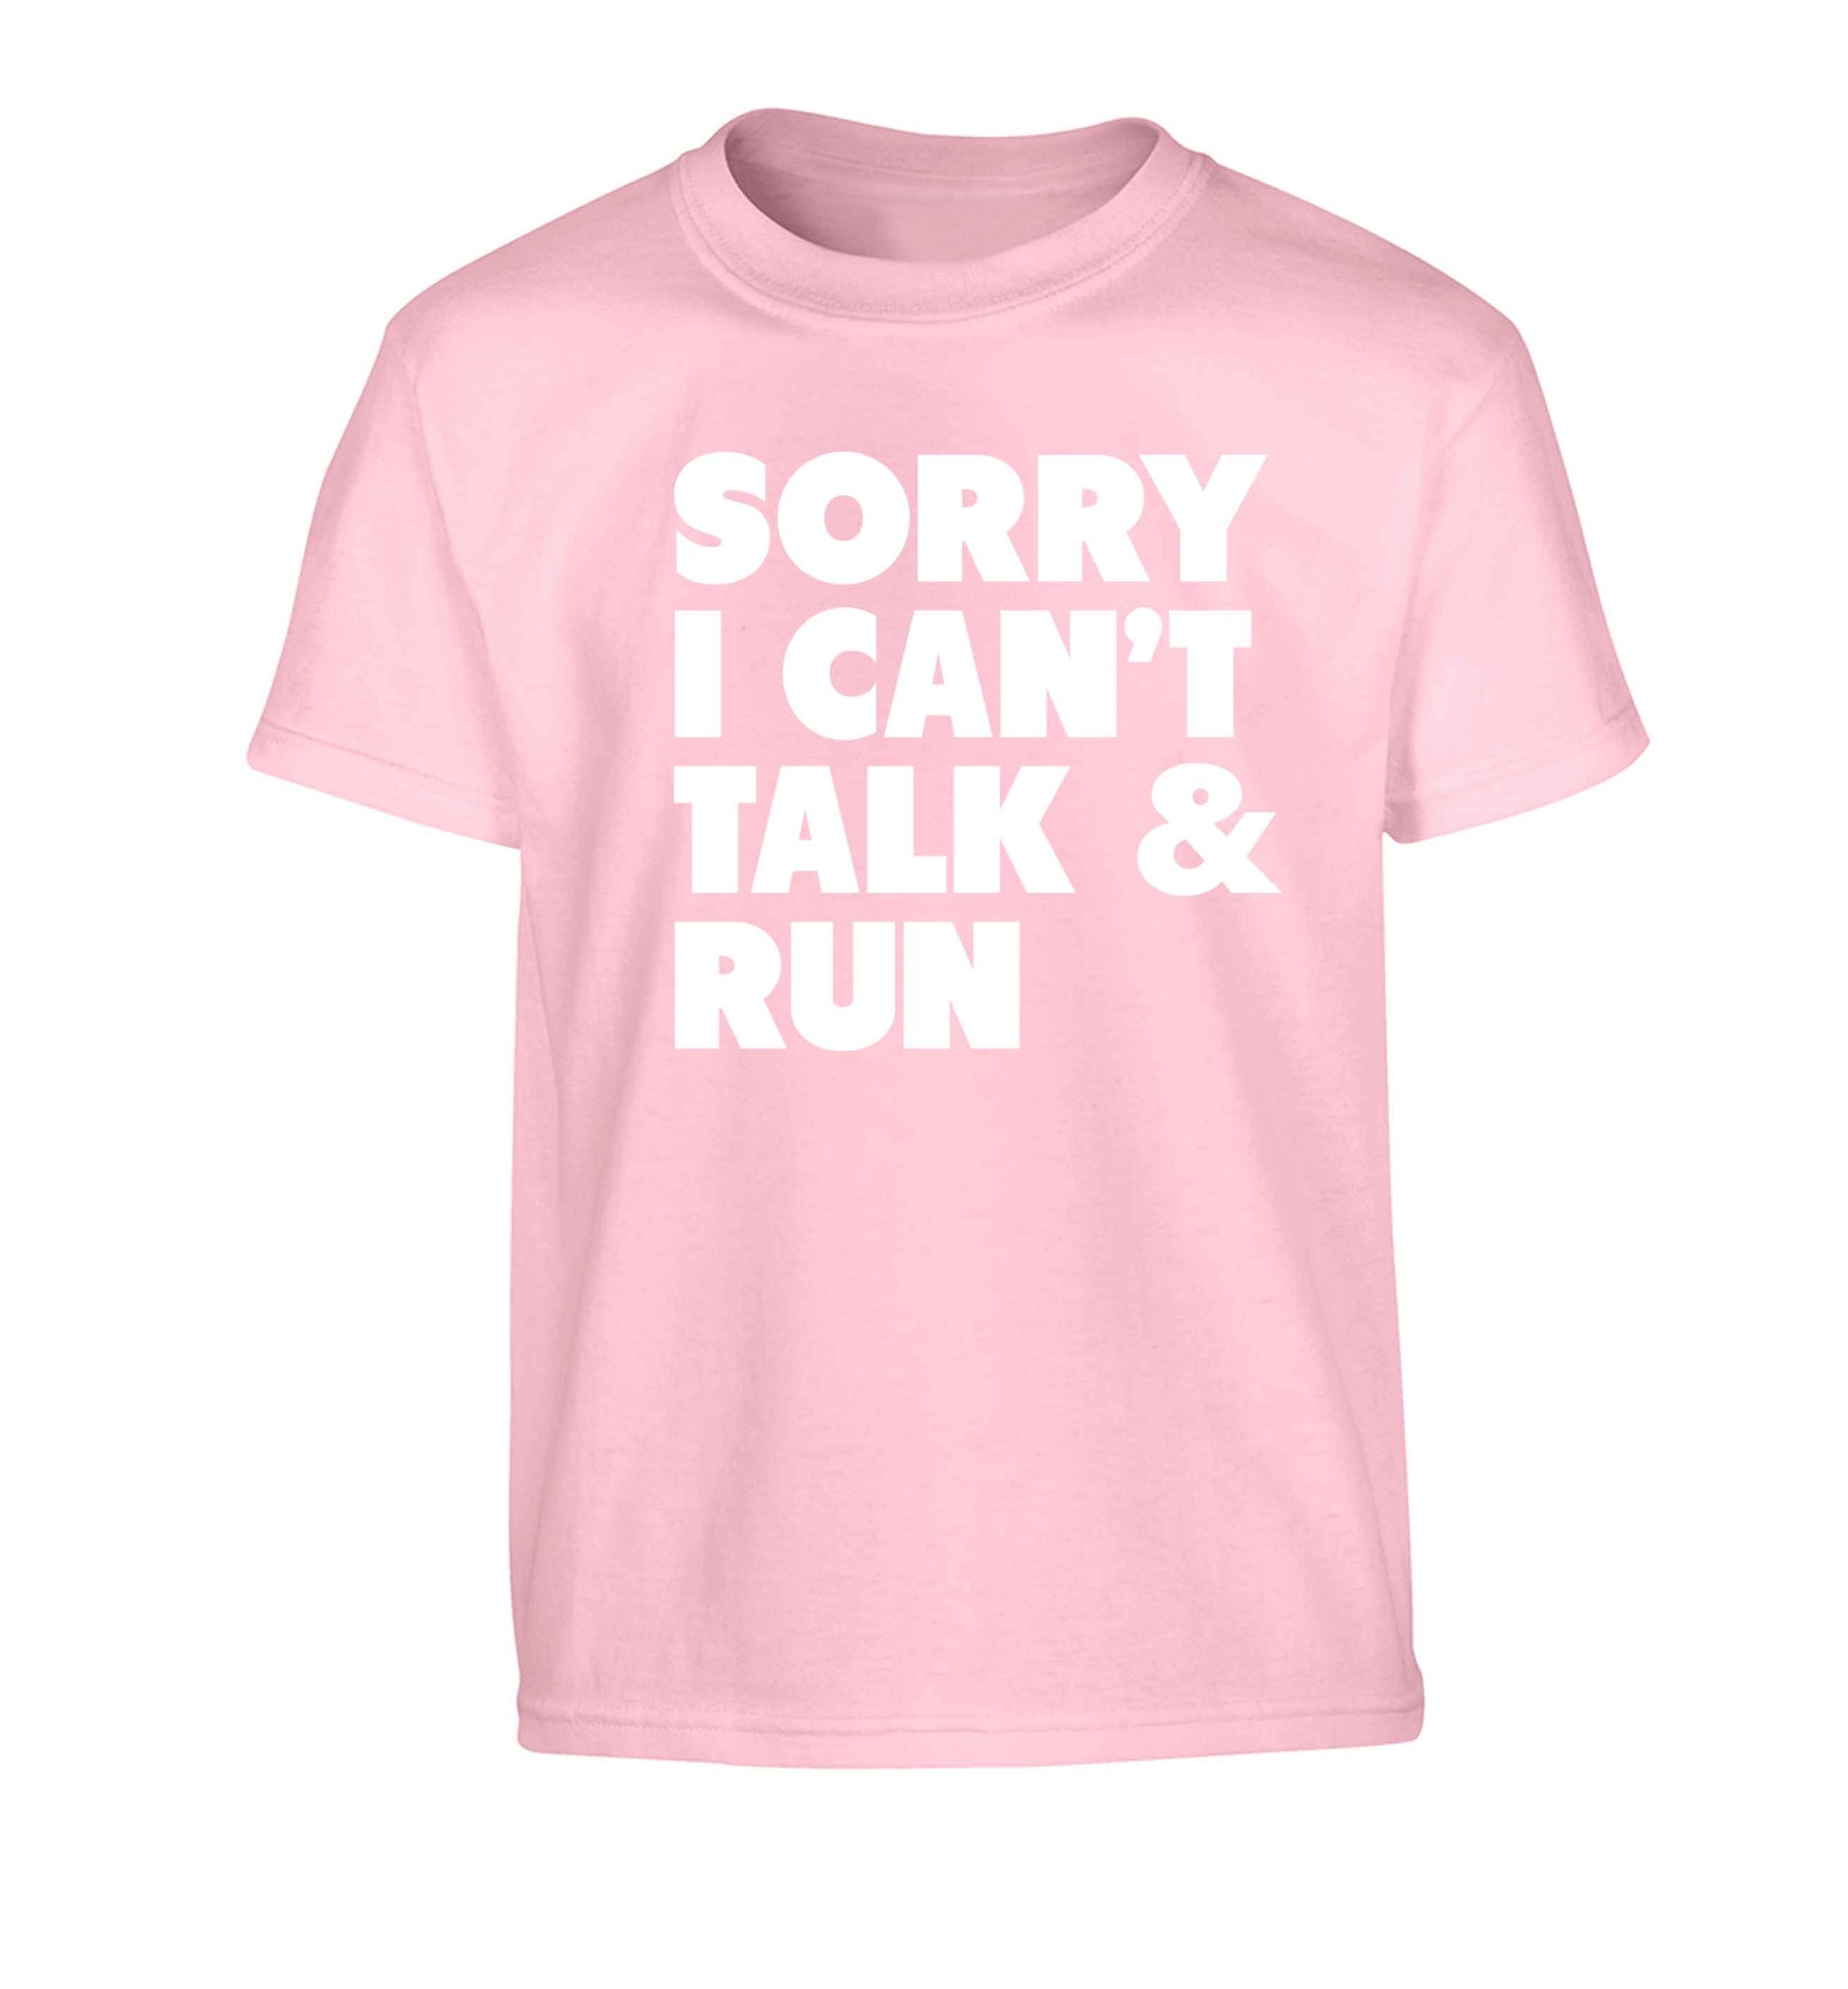 Sorry I can't talk and run Children's light pink Tshirt 12-13 Years